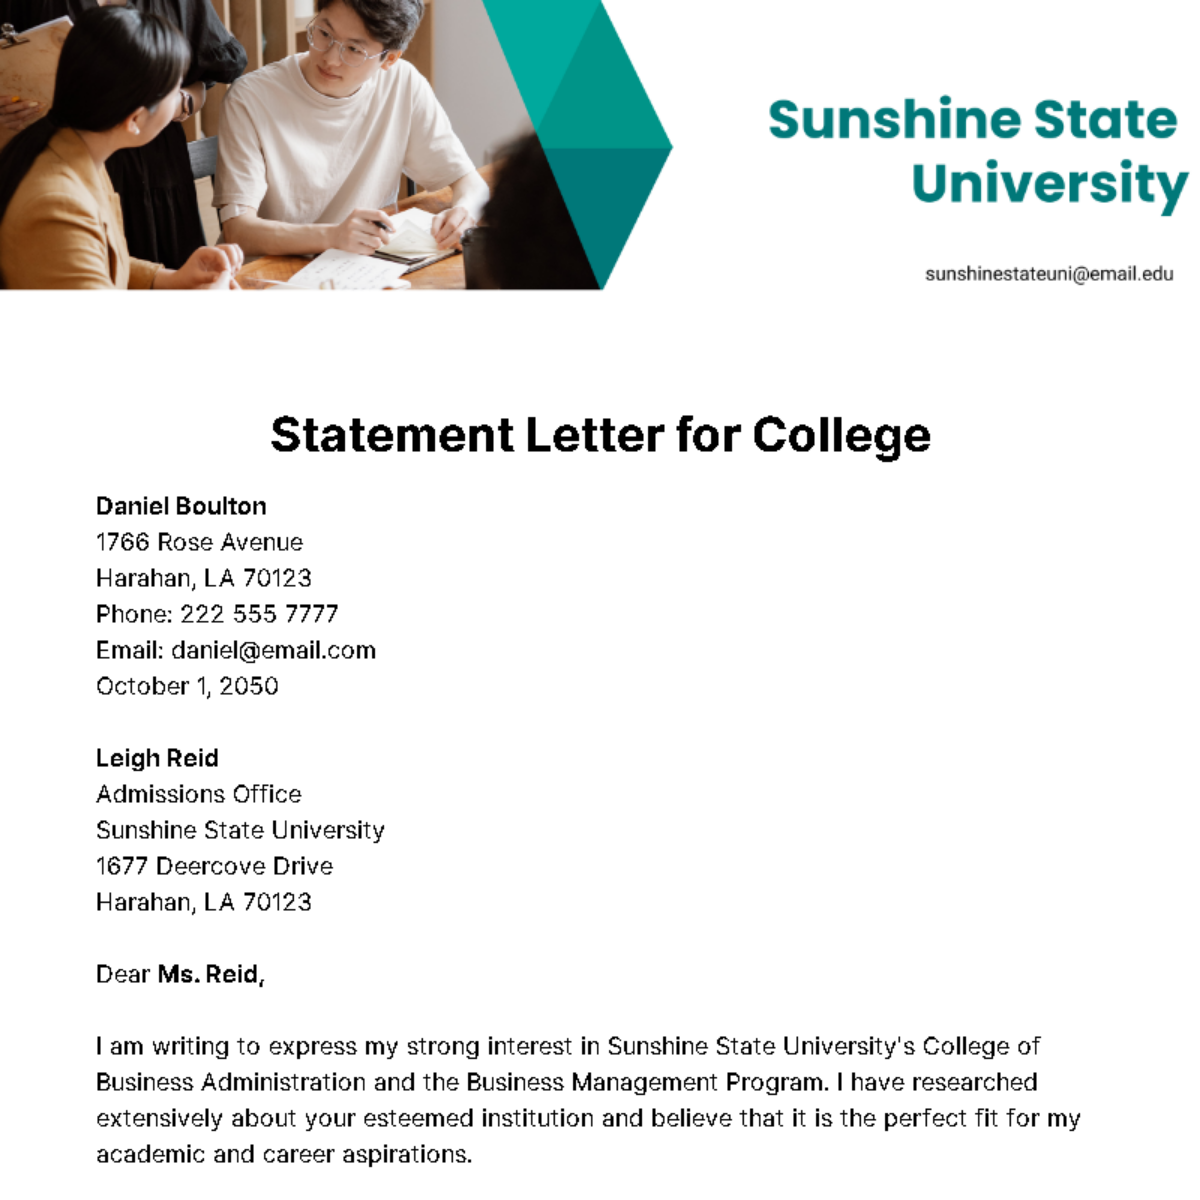 Statement Letter for College Template